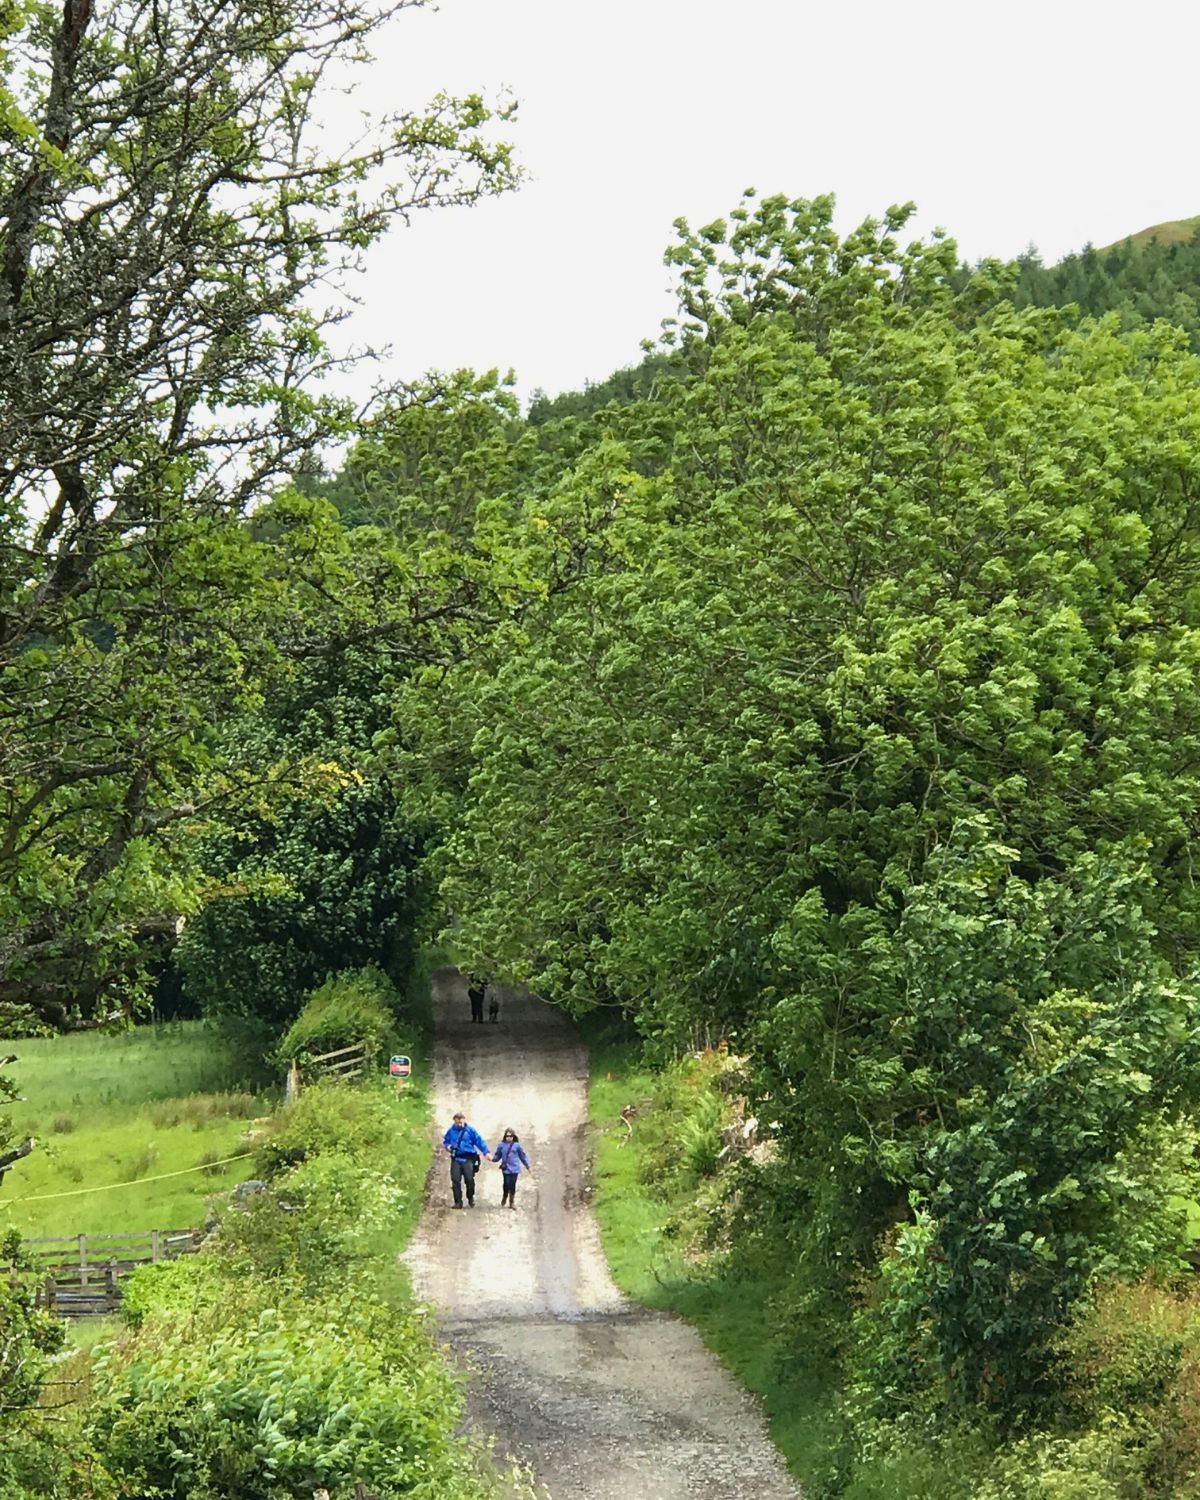 two people walking on a path in the countryside.